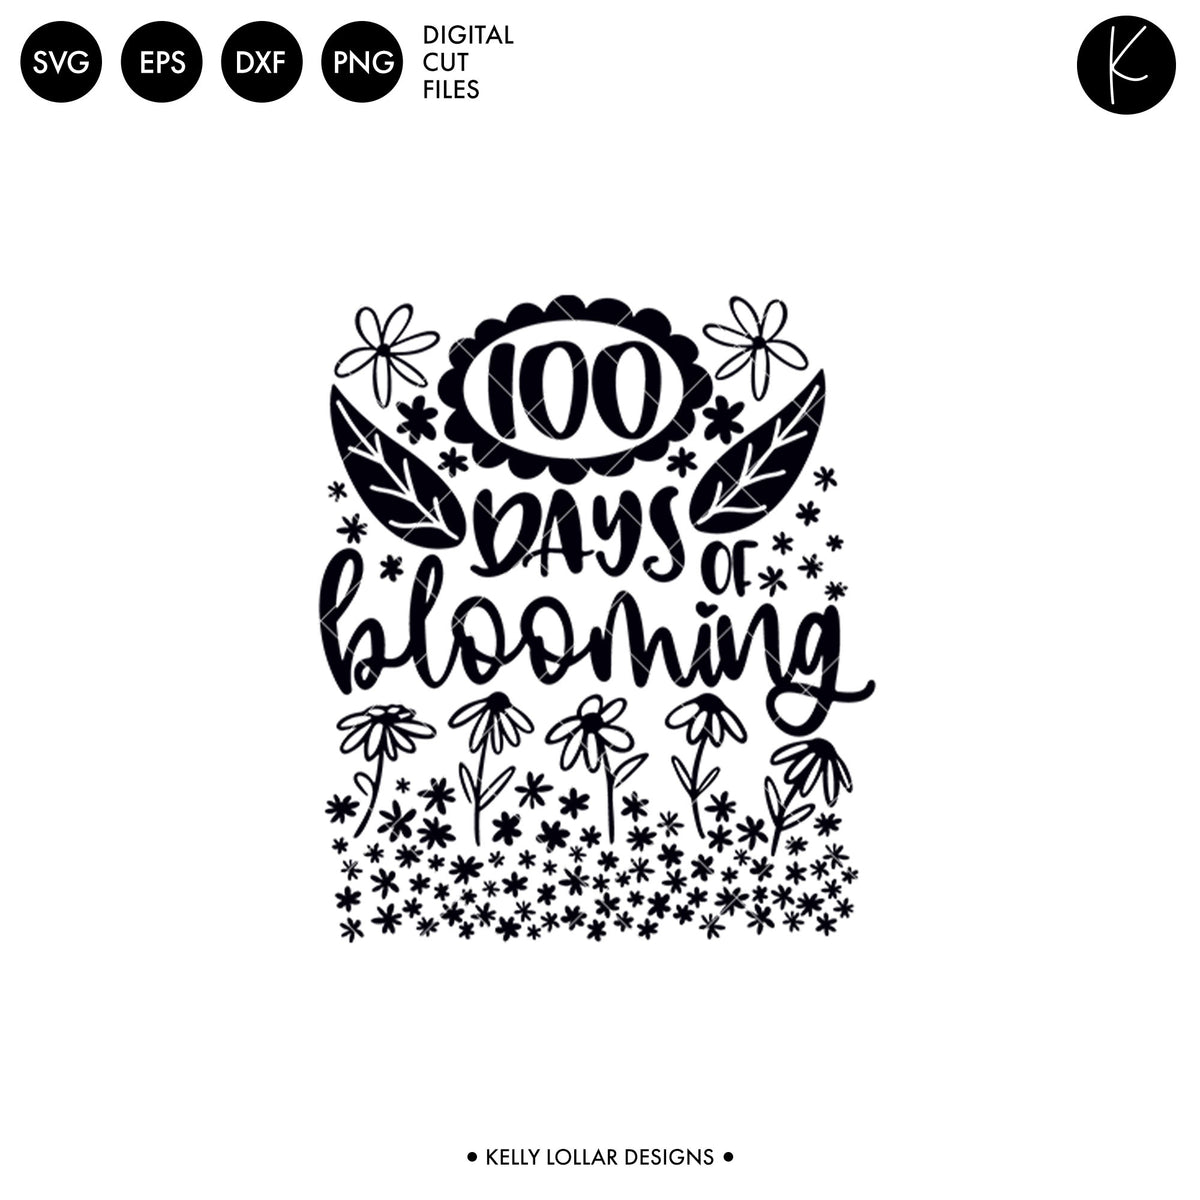 100 Days of Blooming | SVG DXF EPS PNG Cut Files